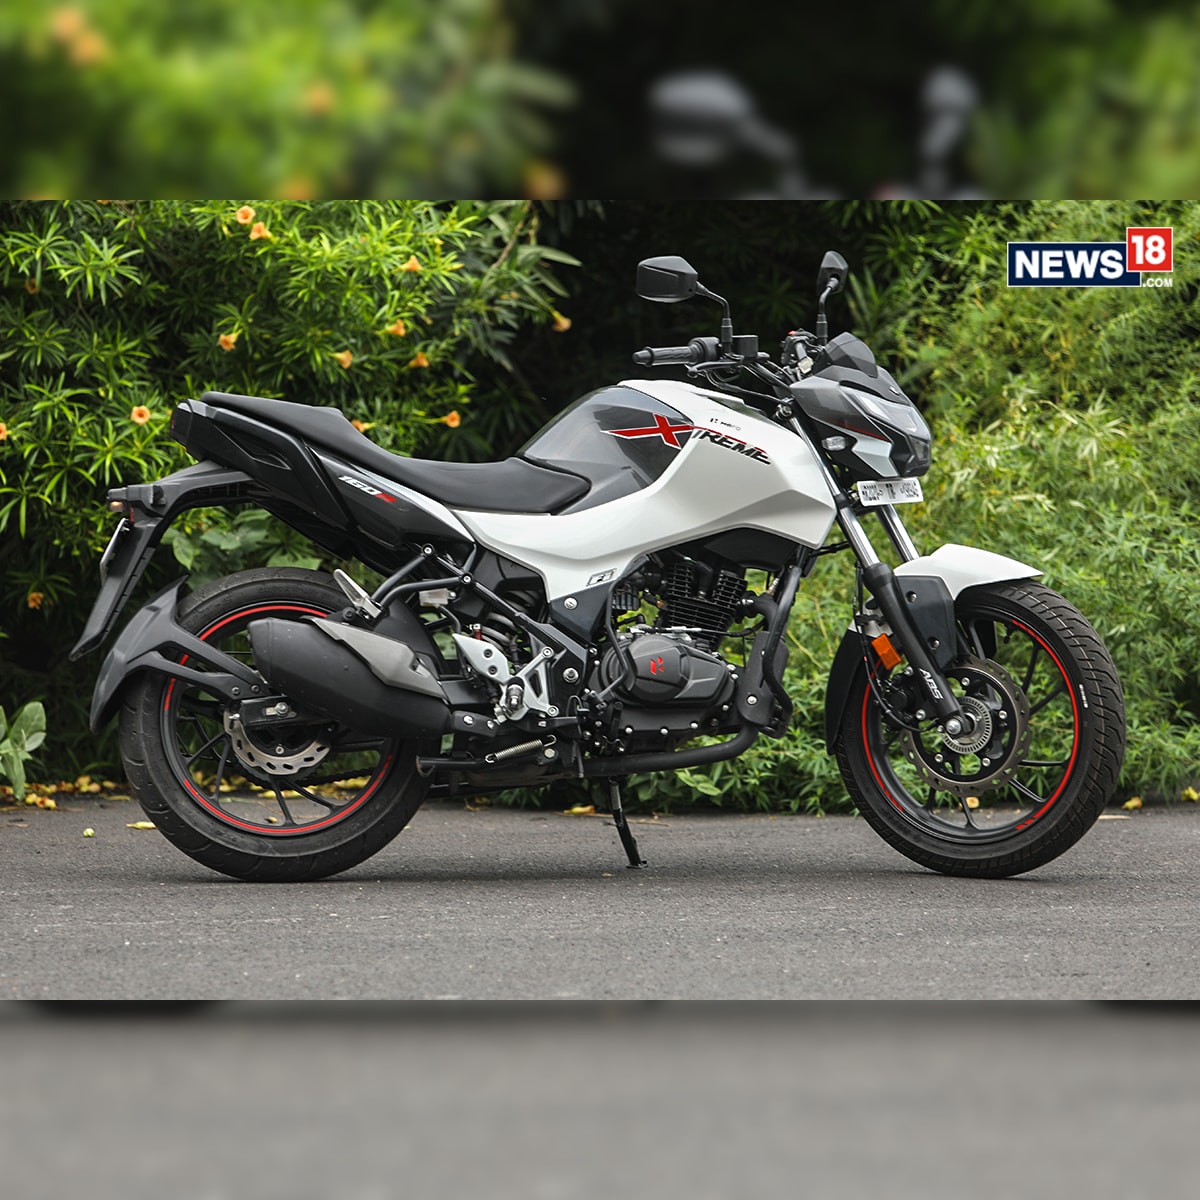 Hero Xtreme 160r Road Test Review A New Chapter Of Being Different And The Best